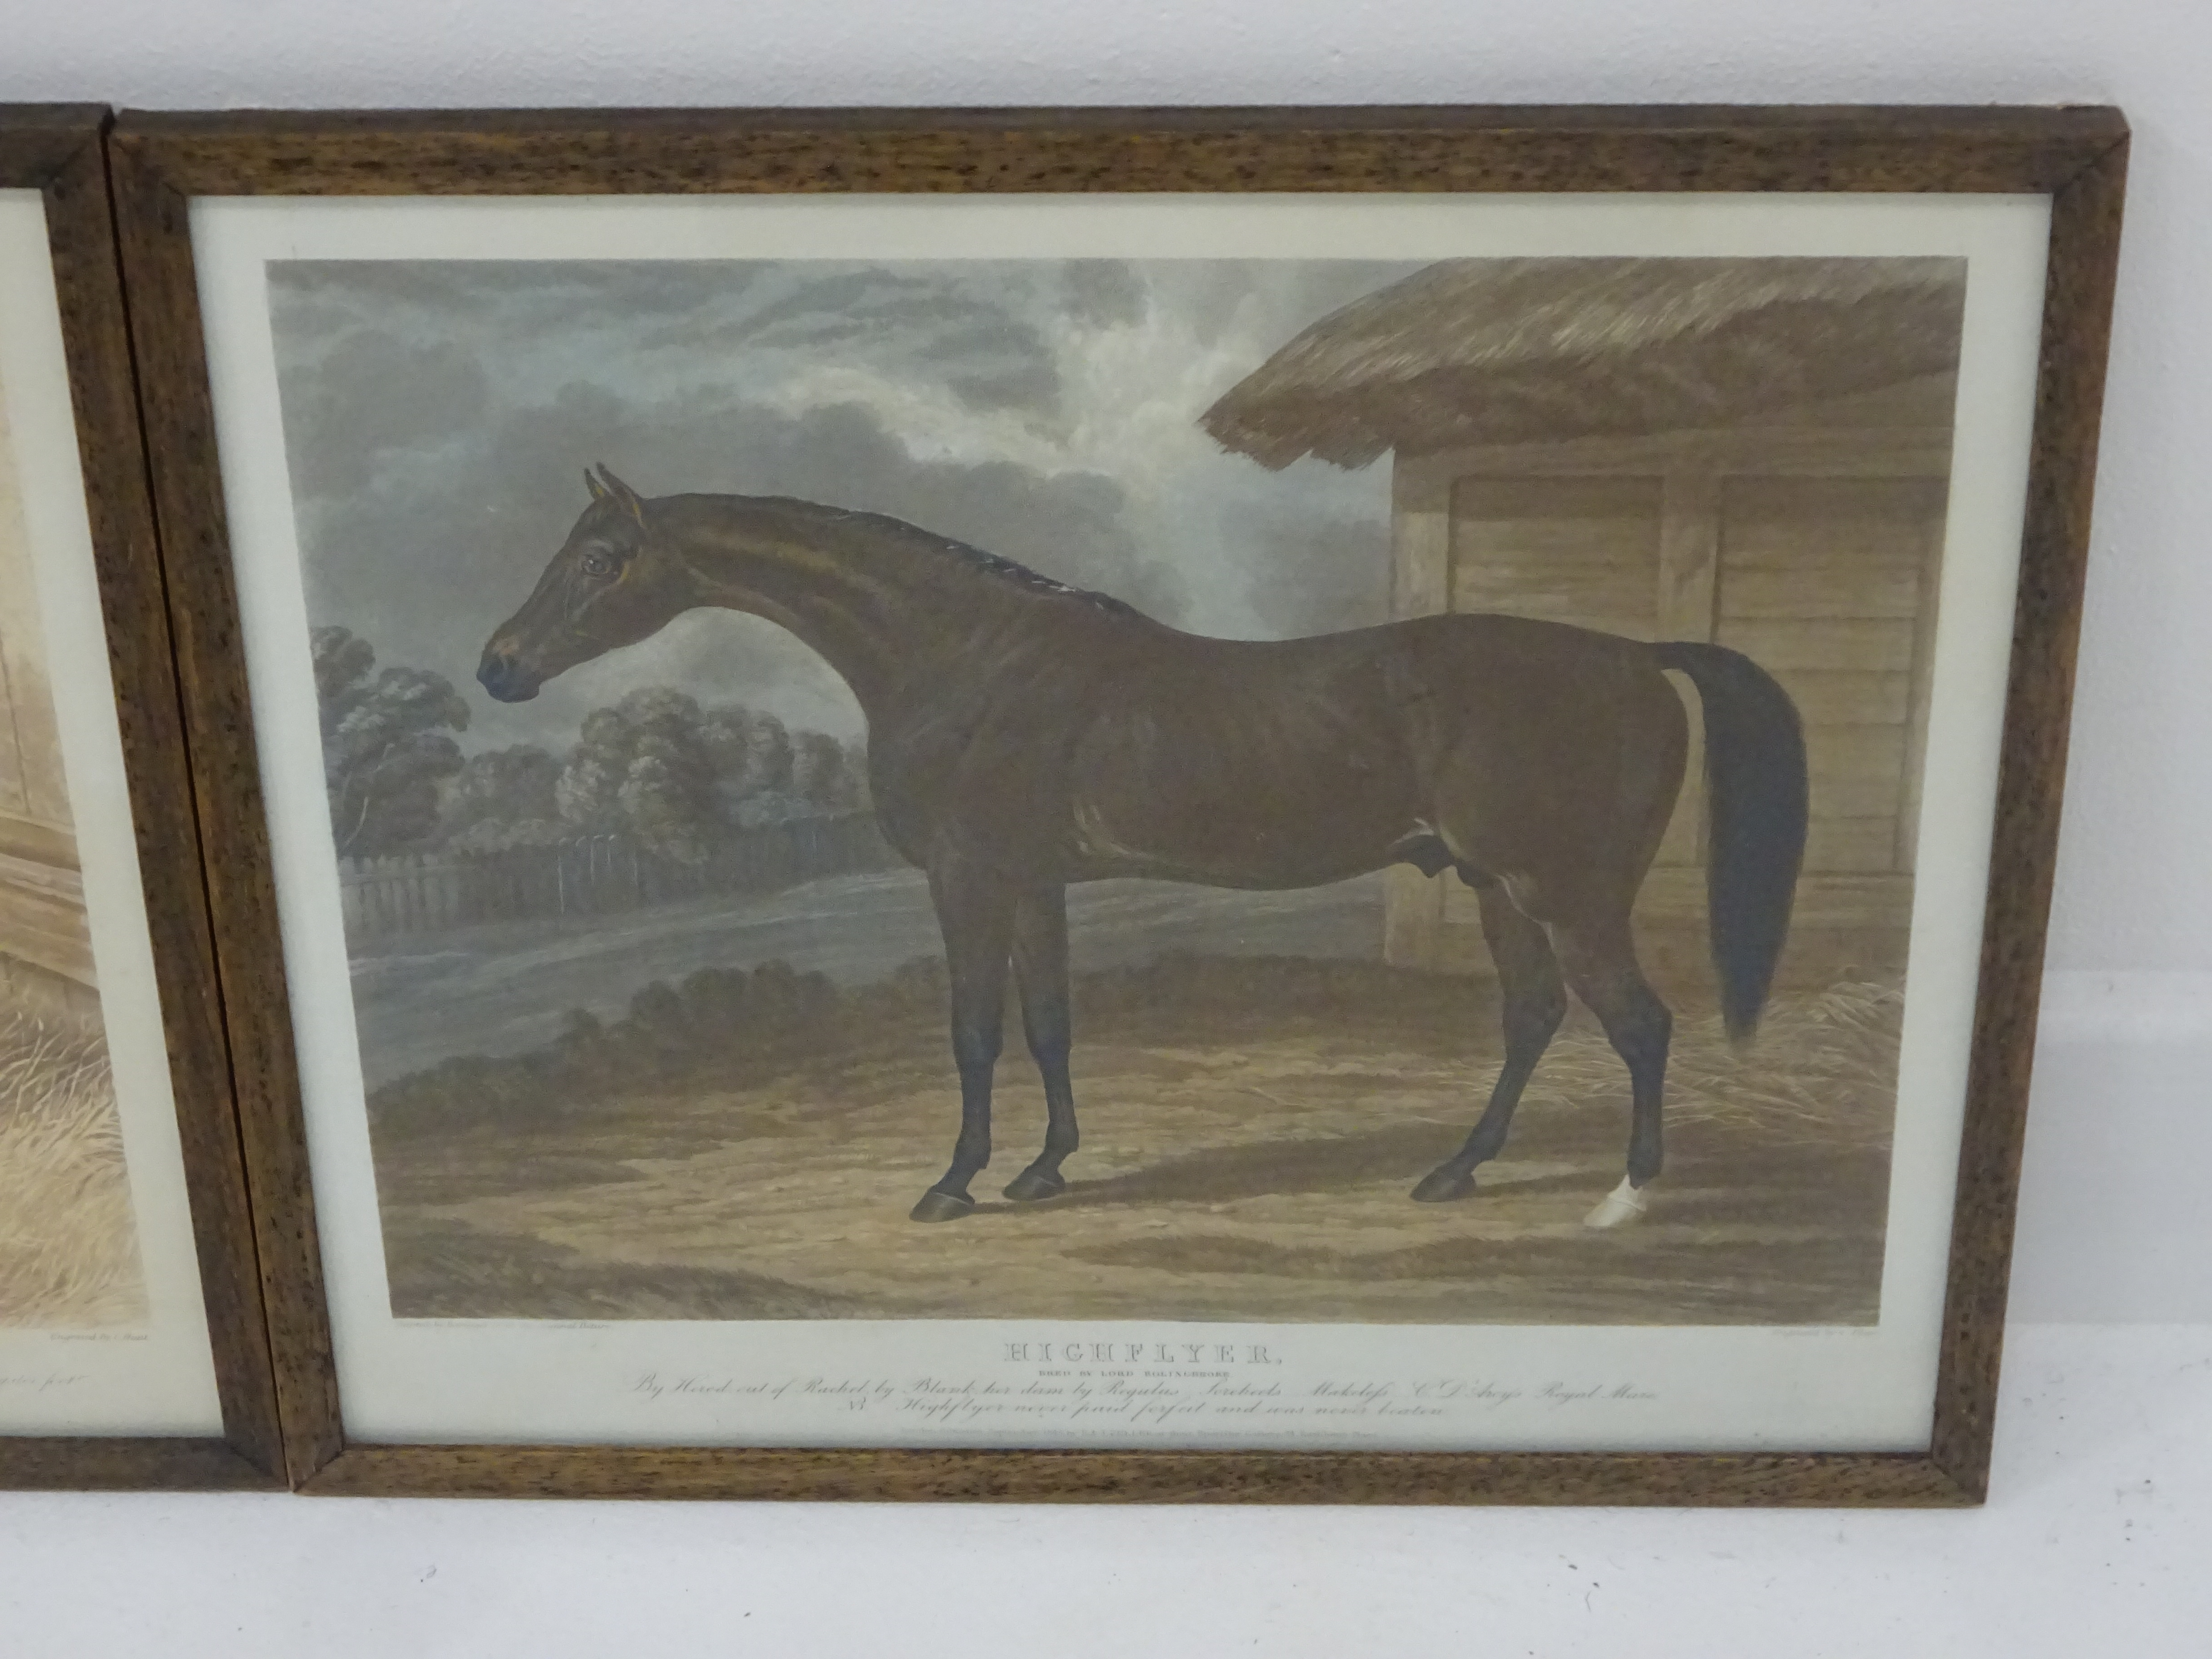 Hunt after Herring - Set of six early 19th Century aquatints of racehorses, 2 proofs, - Image 5 of 7